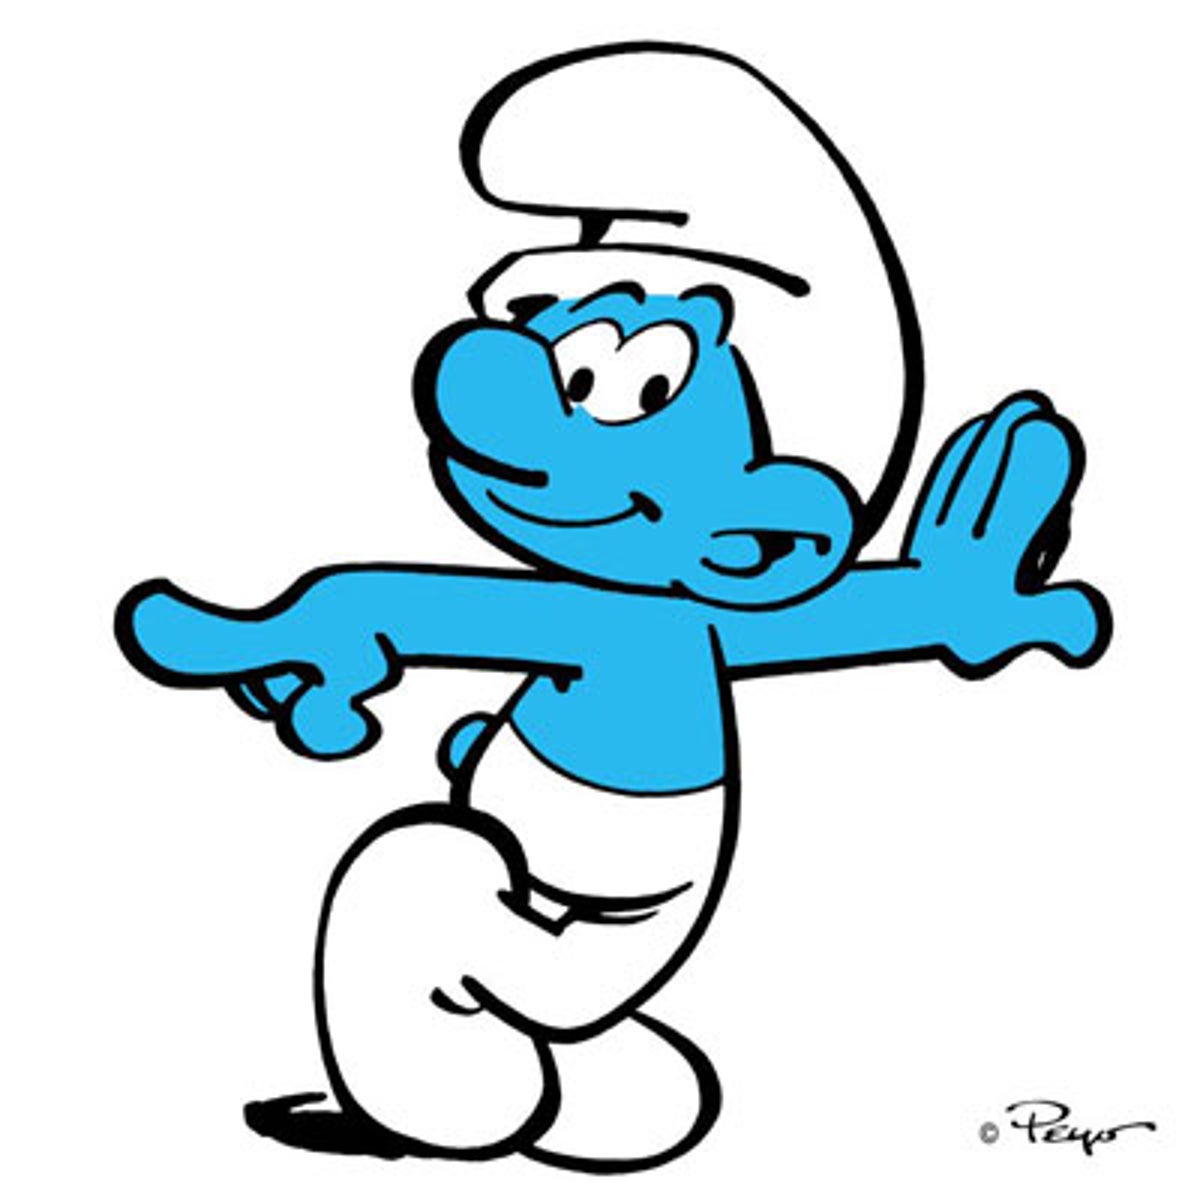 bryan tapnio share a picture of a smurf photos